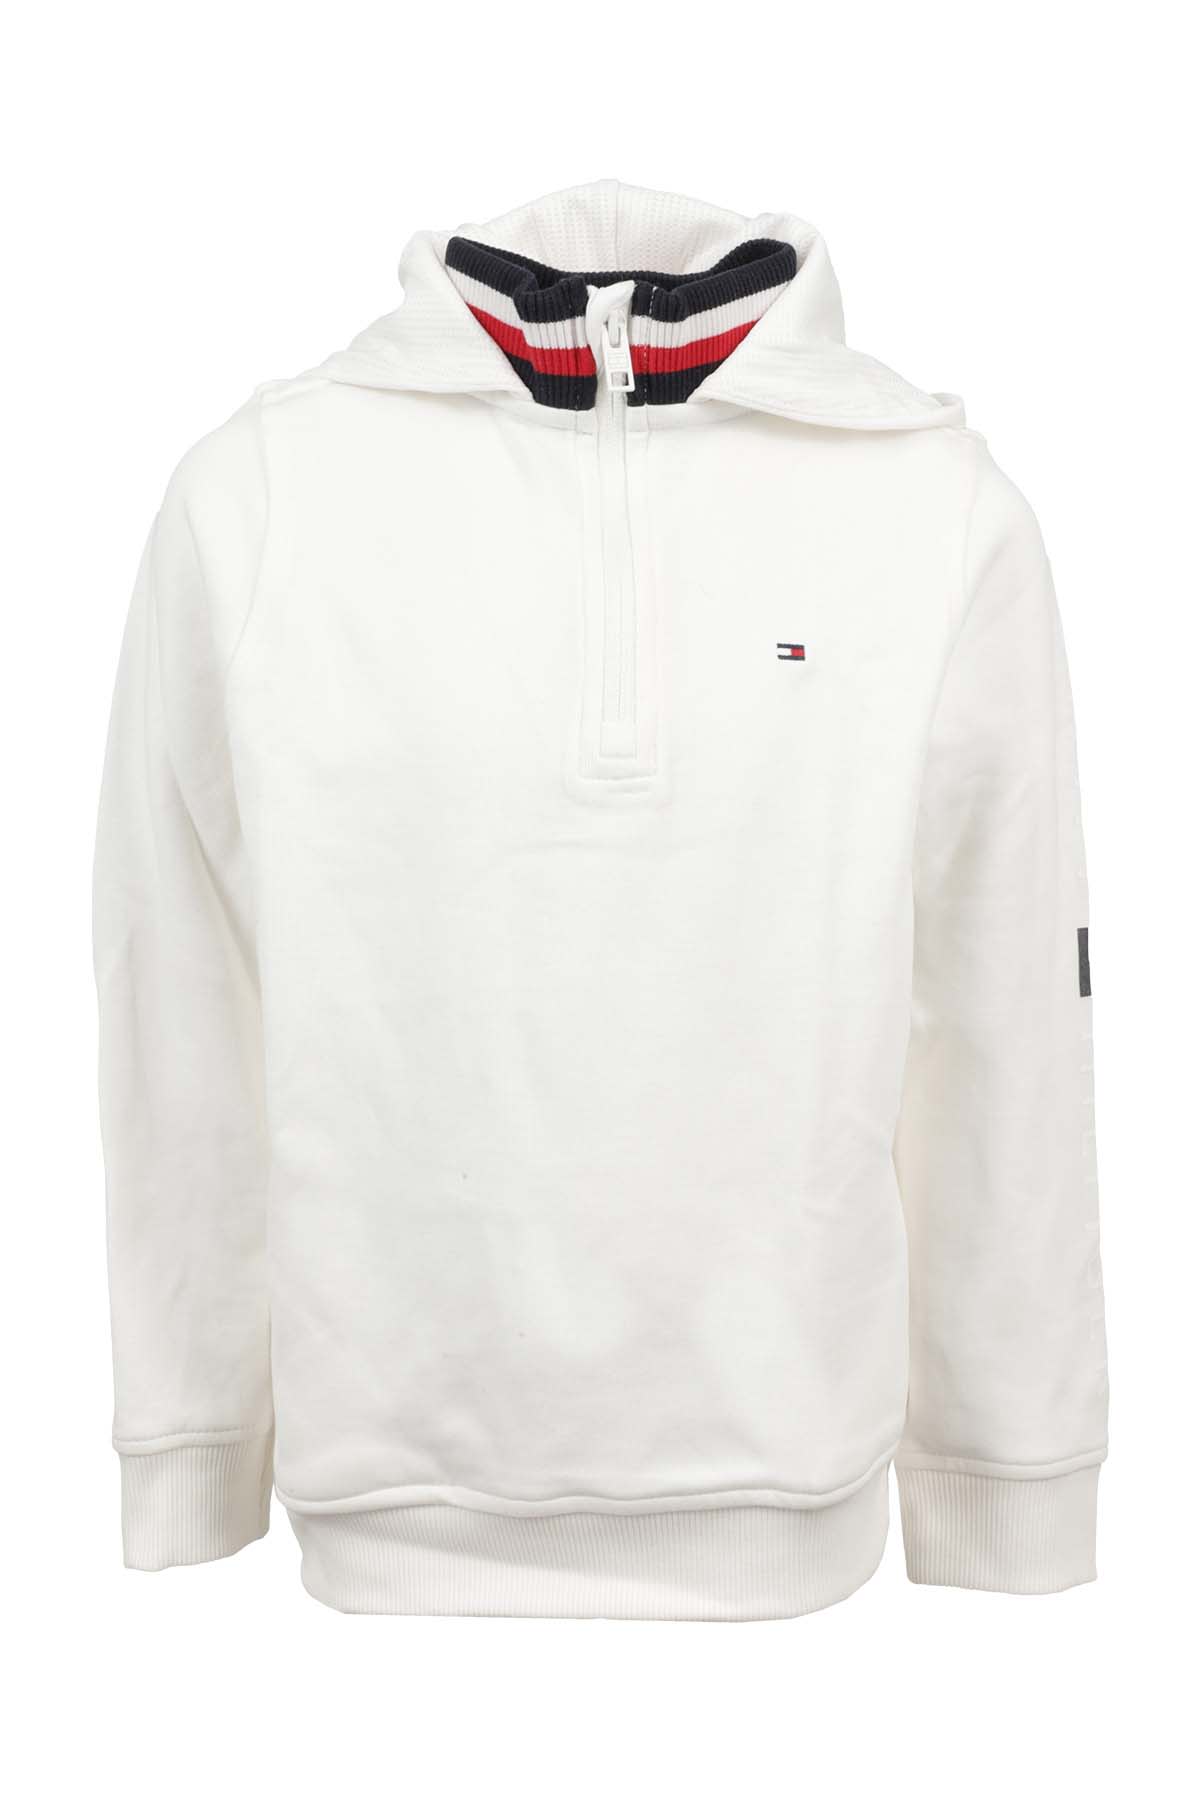 Tommy Hilfiger Tonal Aw Double Collar